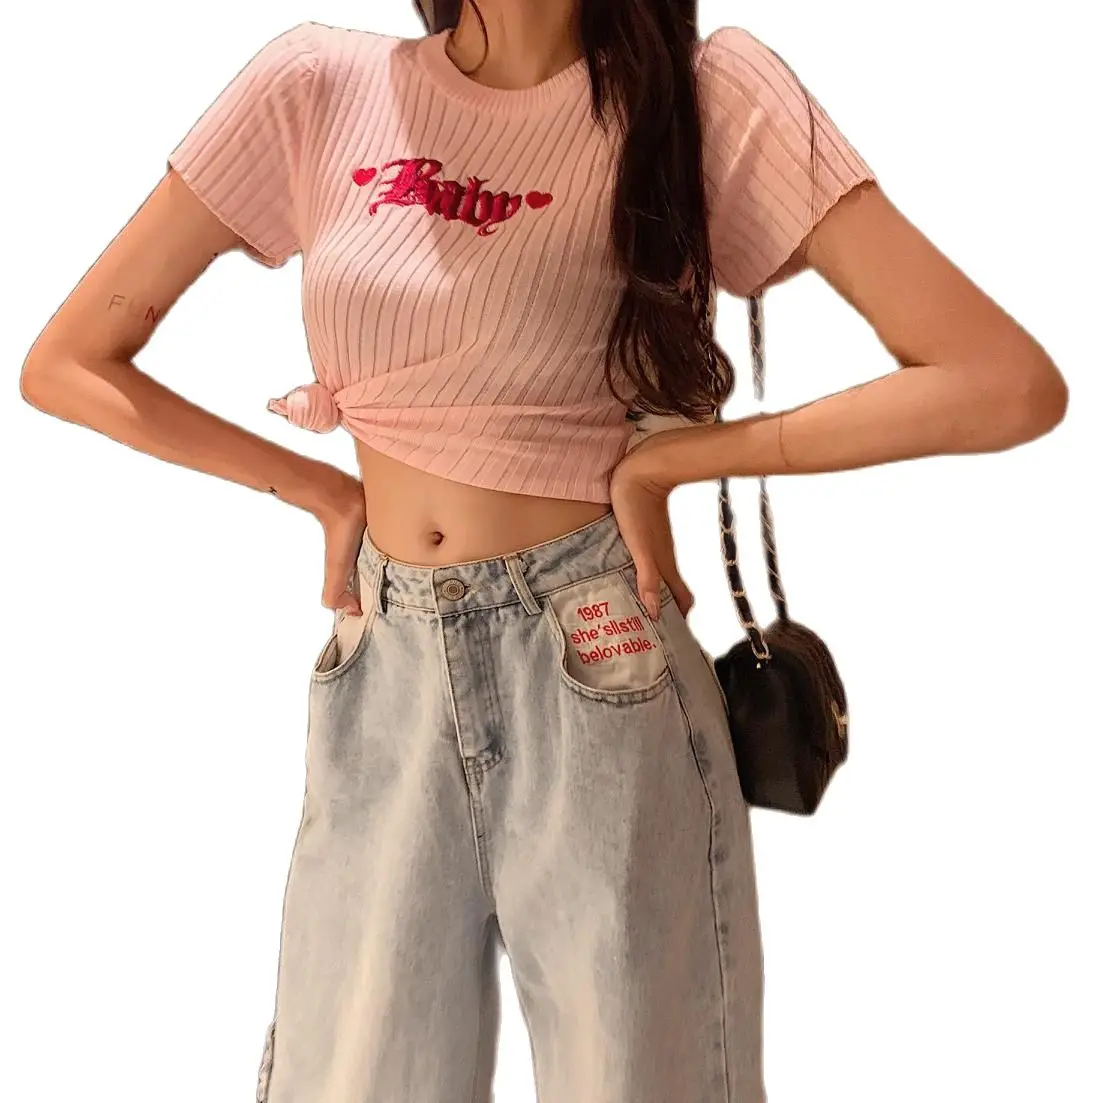 

Pengpious Printed Pockets Cotton Jeans High Waist Harem Pants Design Vintage Worn Out Washed with Holes Women Jeans